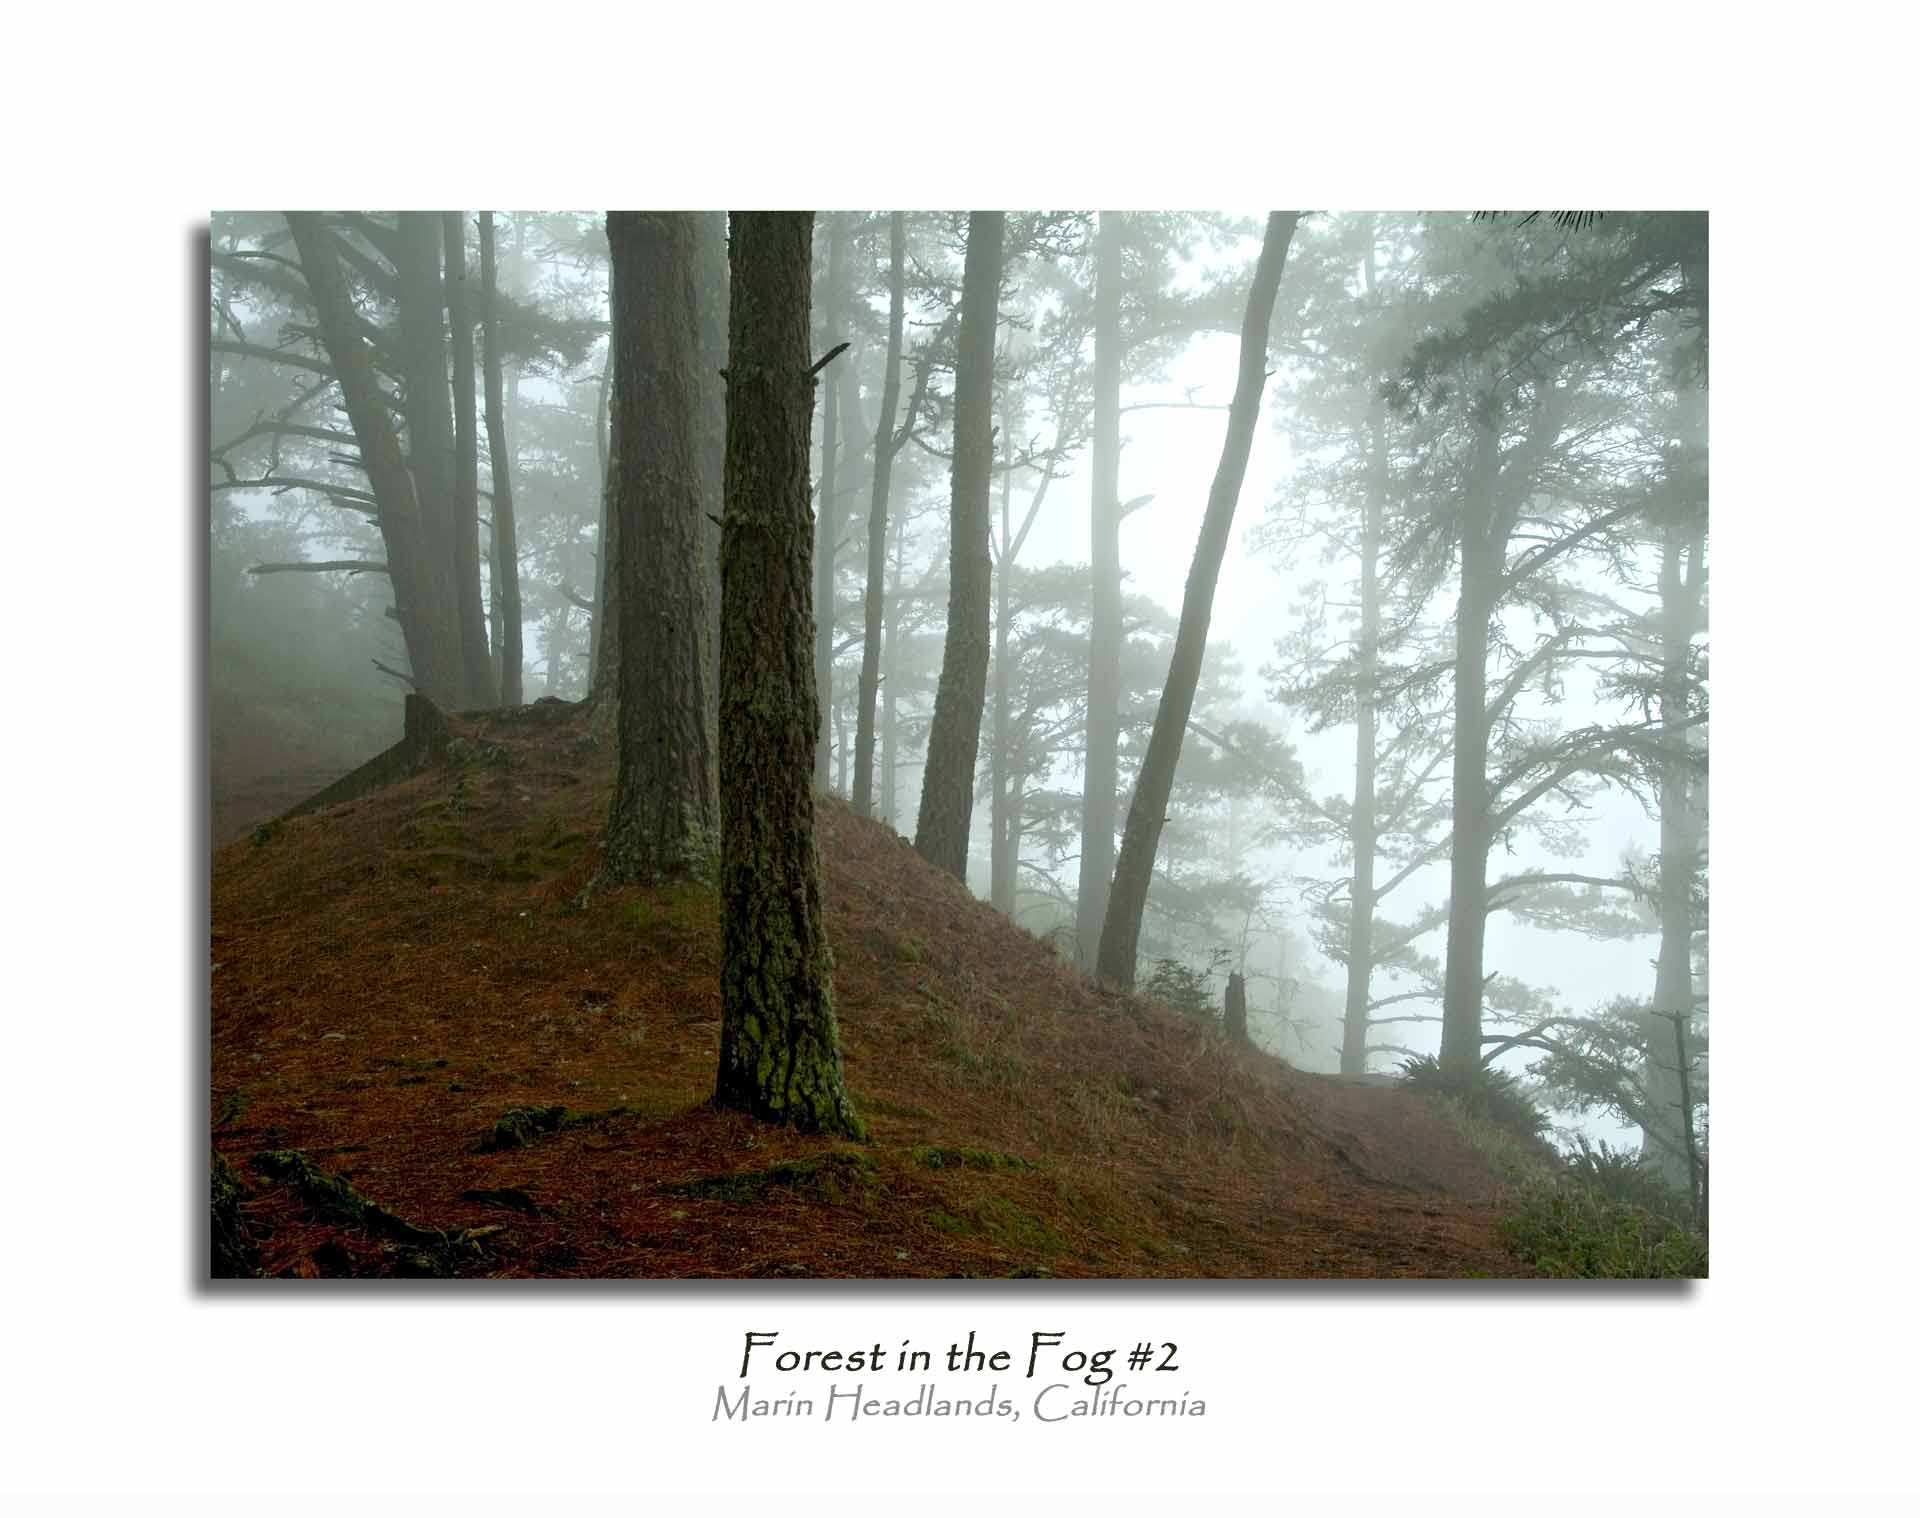 Forest in the Fog #2